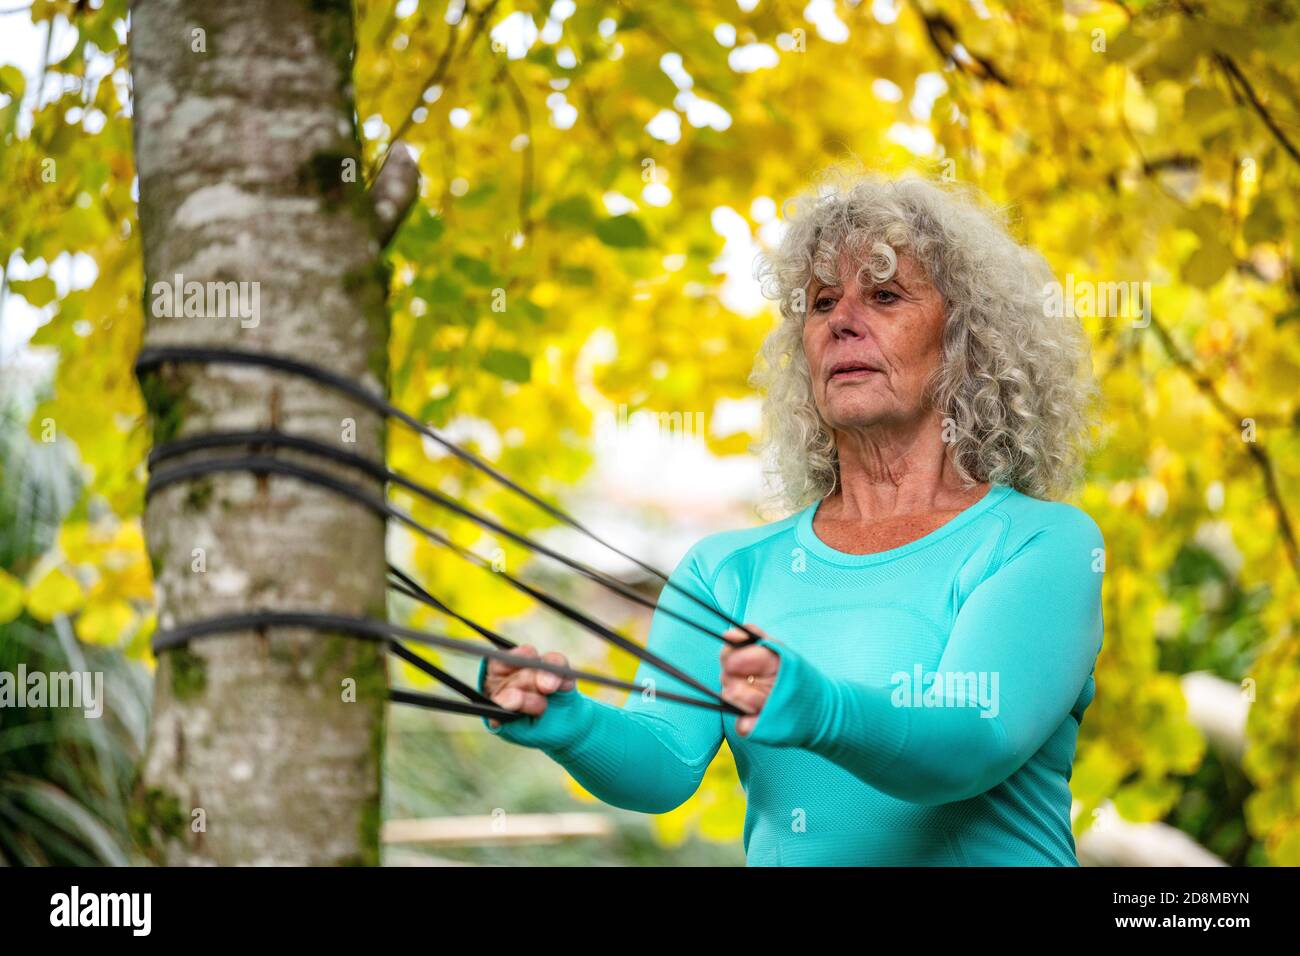 A woman in her sixties exercises outdoors with a resistance band in autumn. Stock Photo